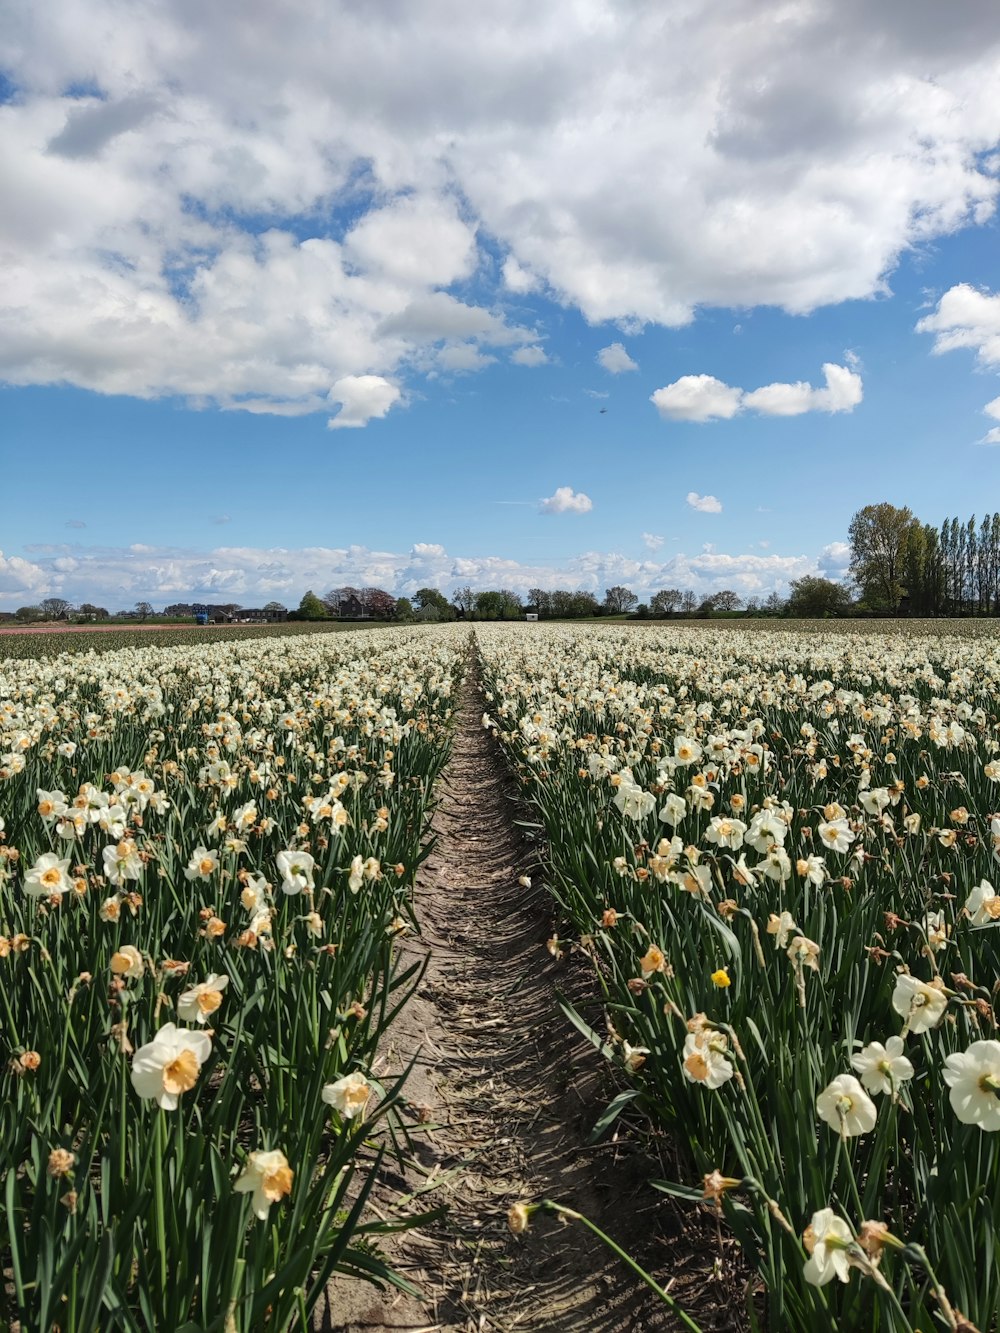 a field full of white flowers under a cloudy blue sky